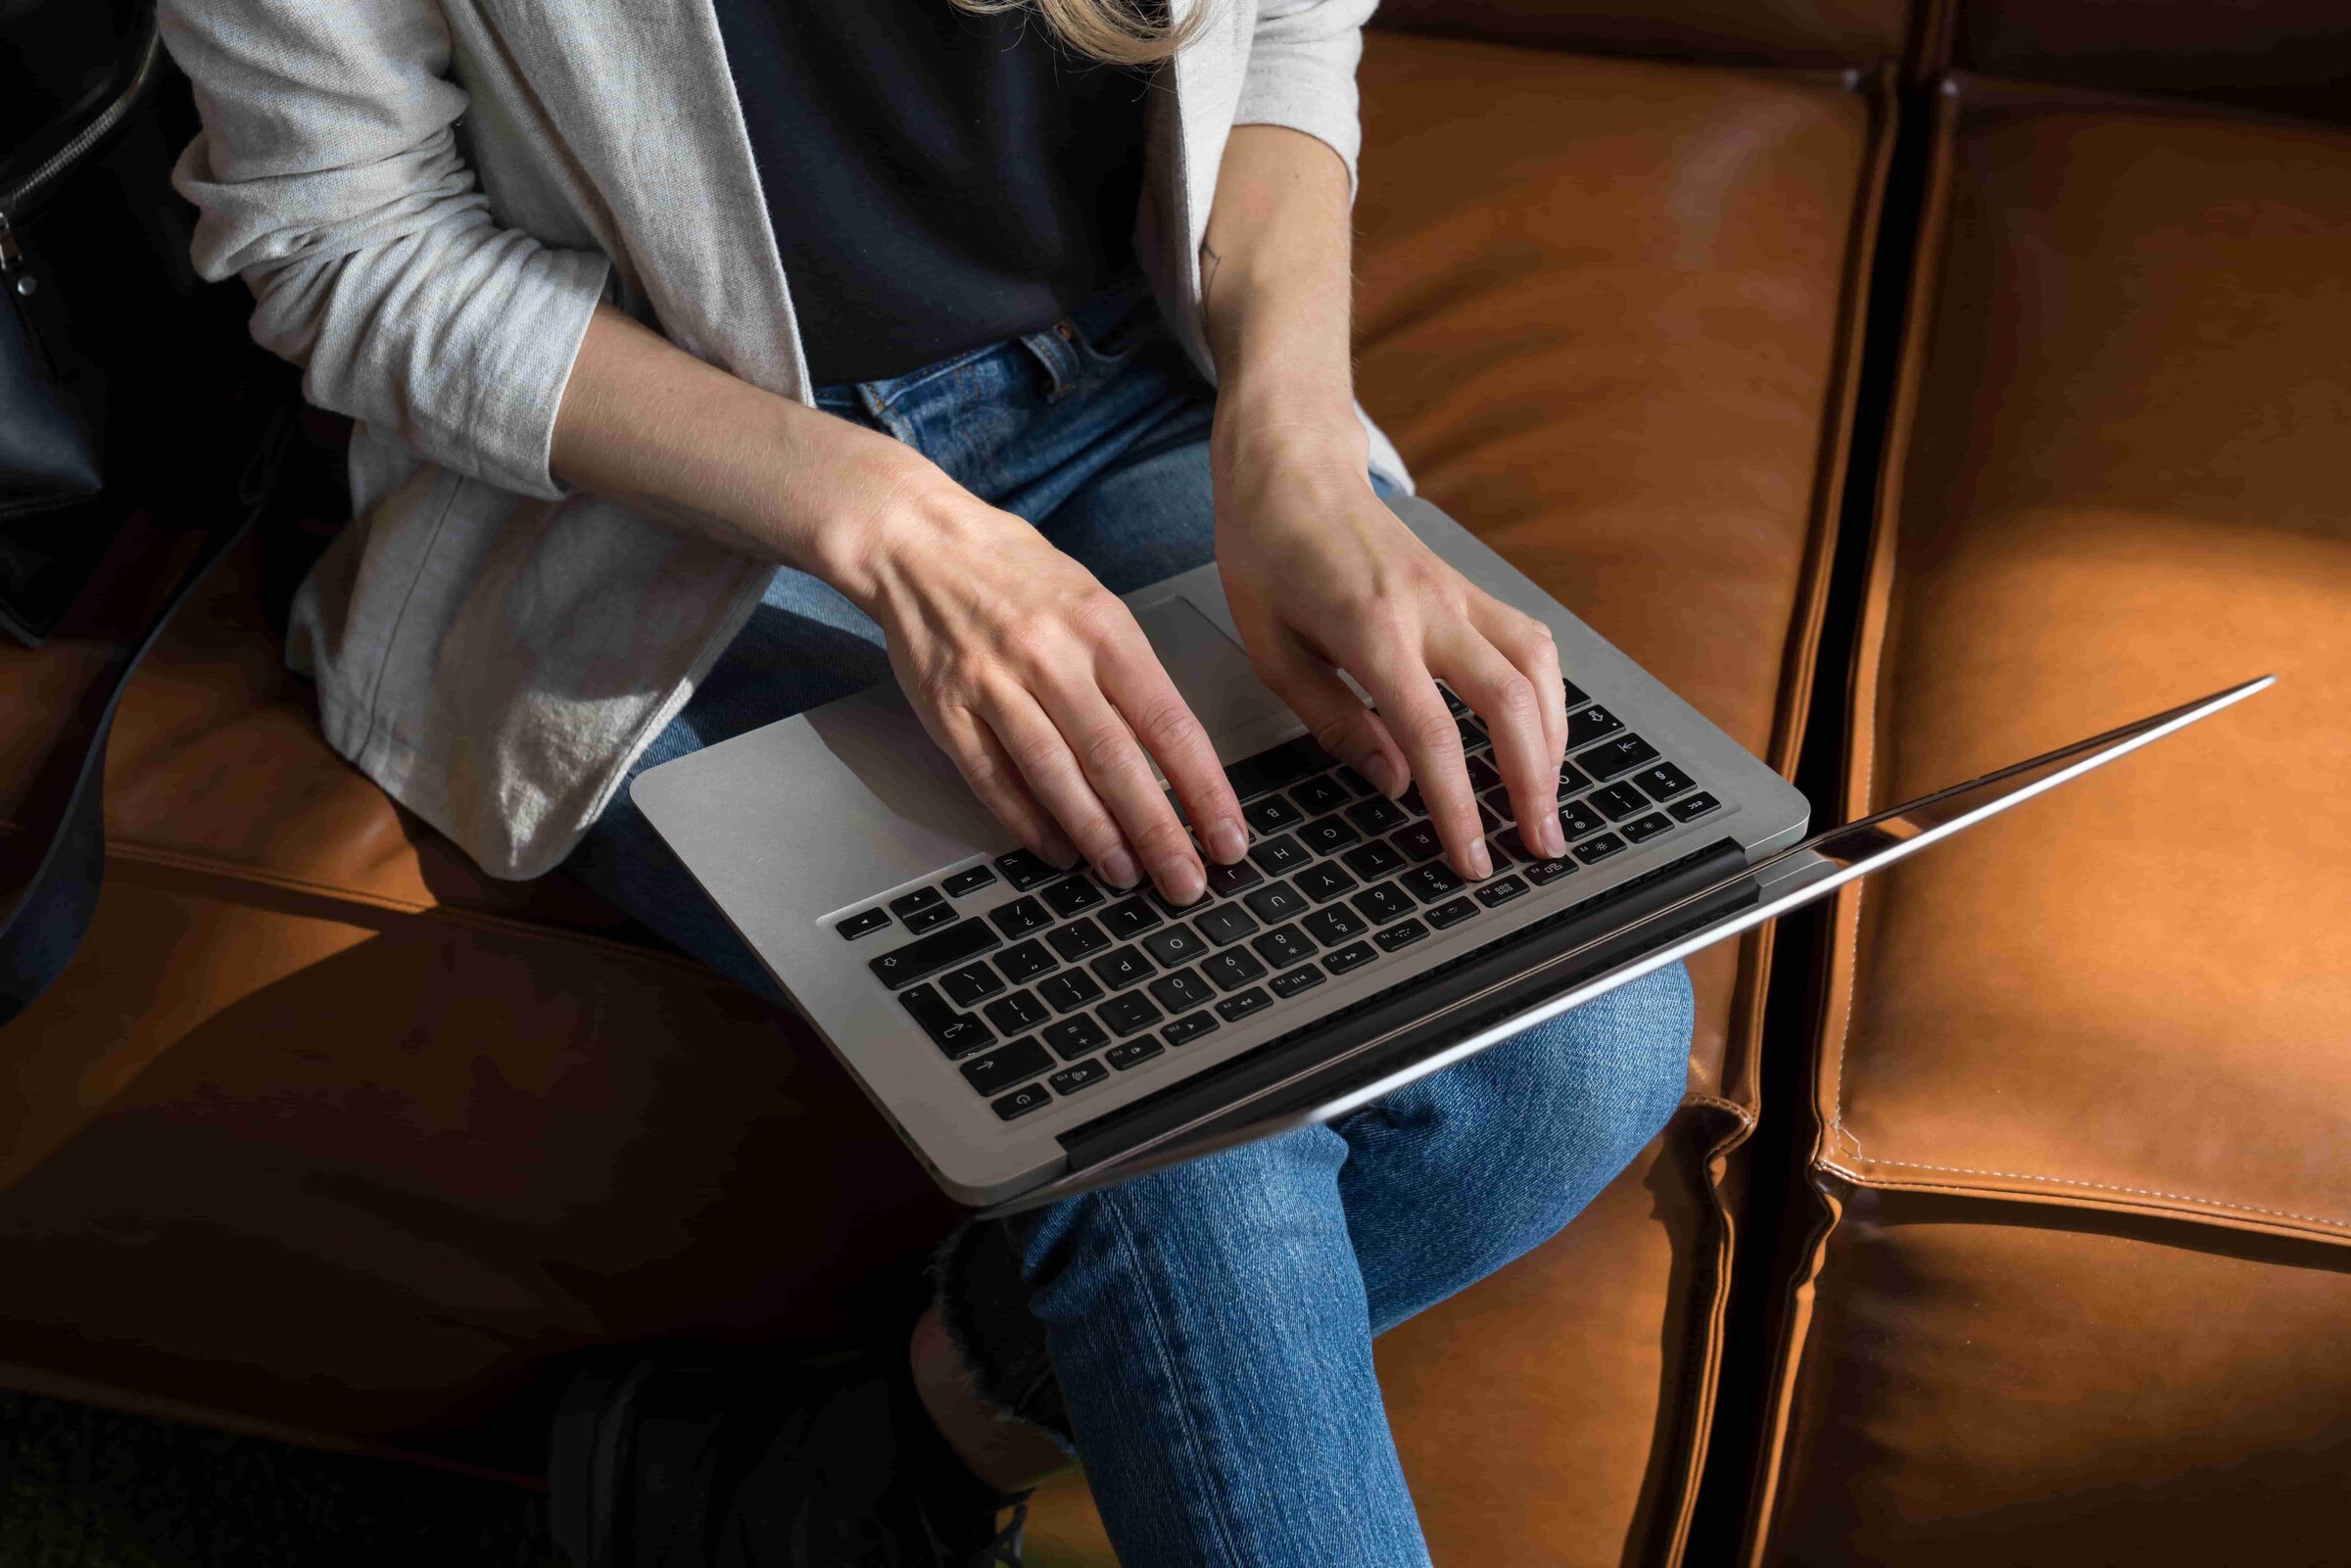 The image depicts a woman signing onto her laptop to watch ITN’s free video series about how you can discover your dream career!